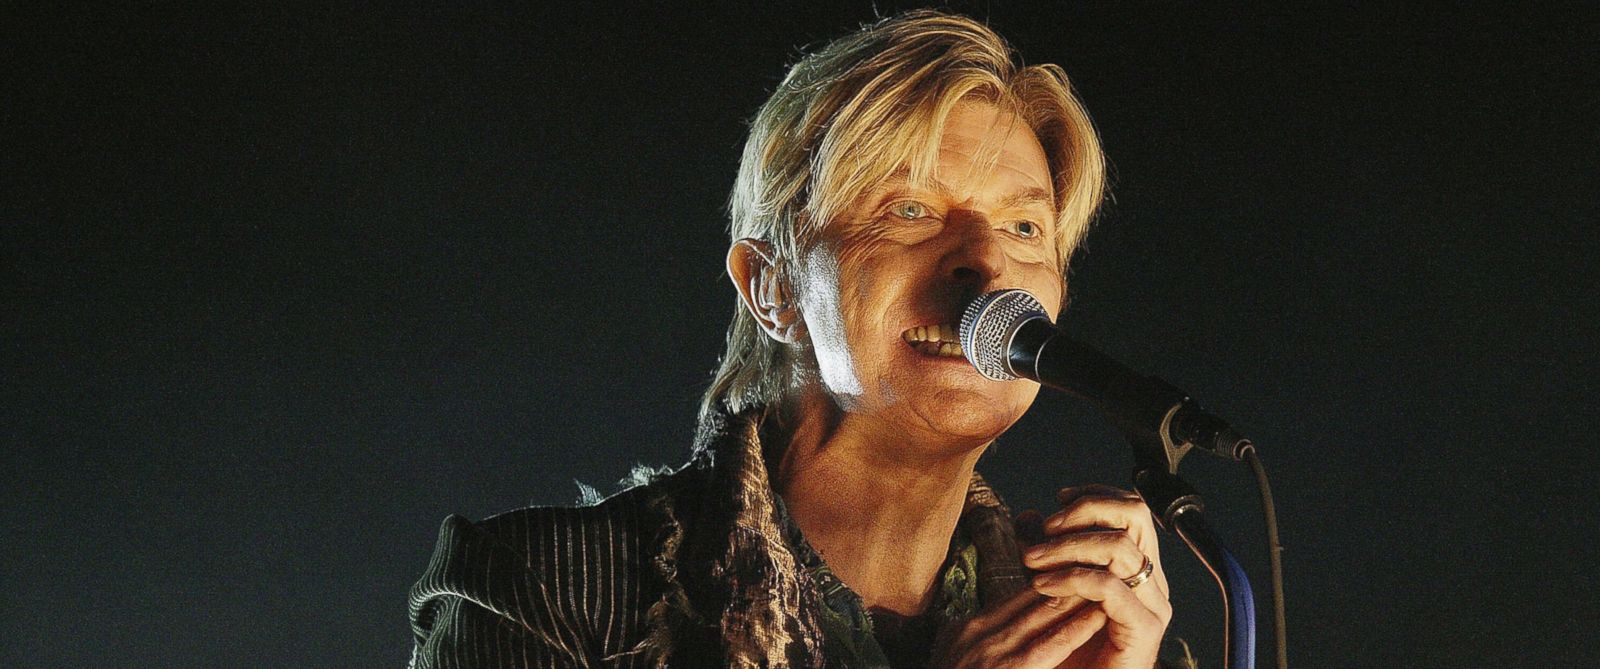 PHOTO: David Bowie performs on stage on June 13, 2004 in Newport, UK.